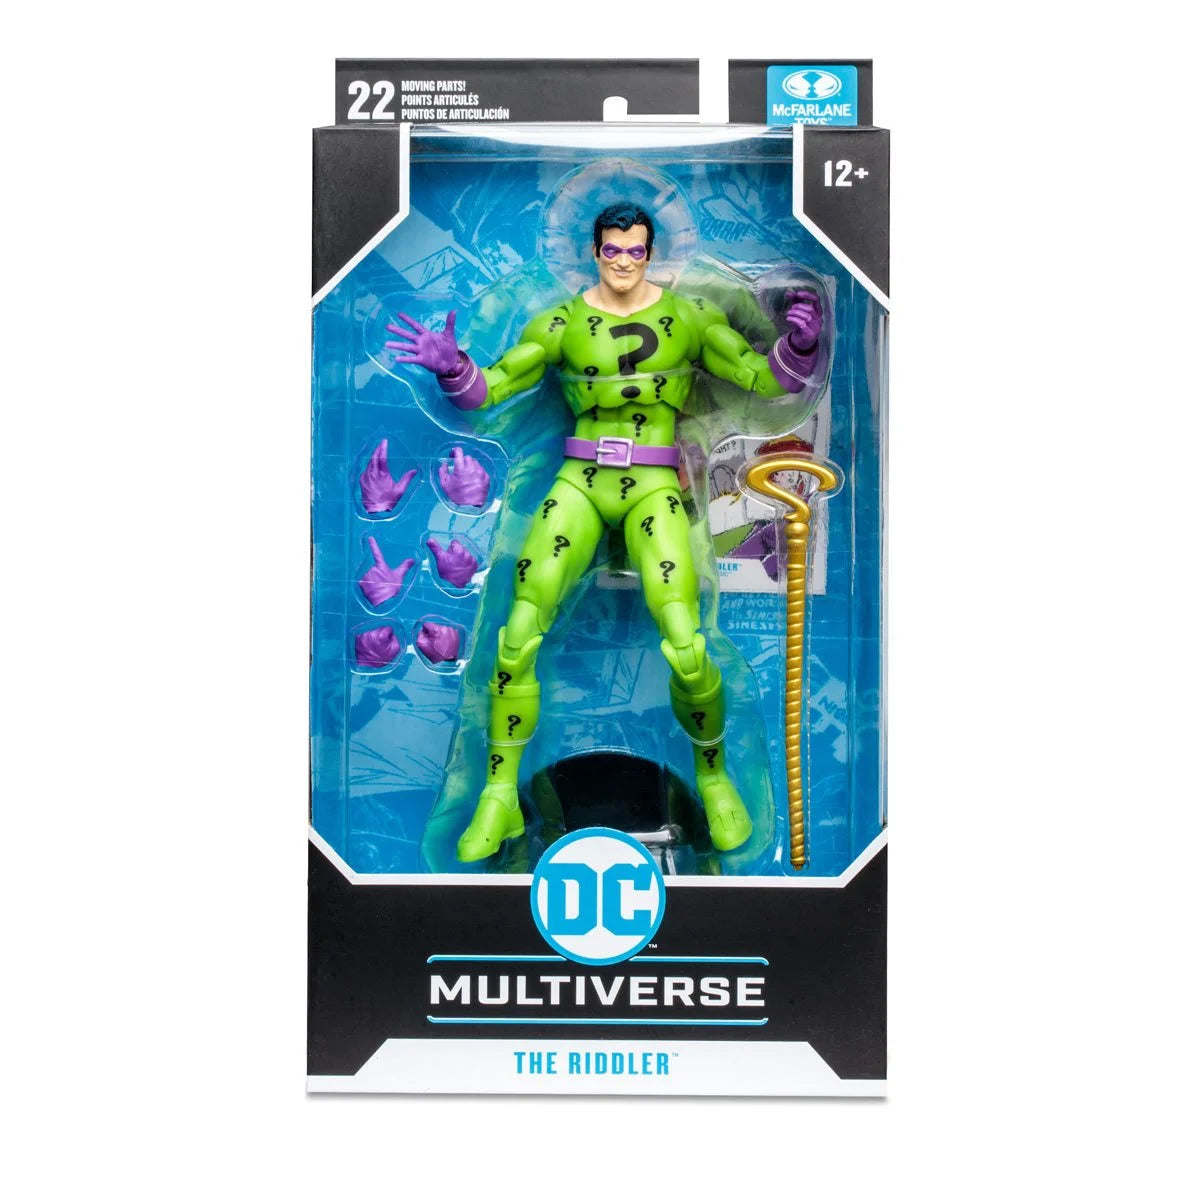 DC Multiverse Riddler Classic 7-Inch Scale Action Figure in a packaging front view - Heretoserveyou